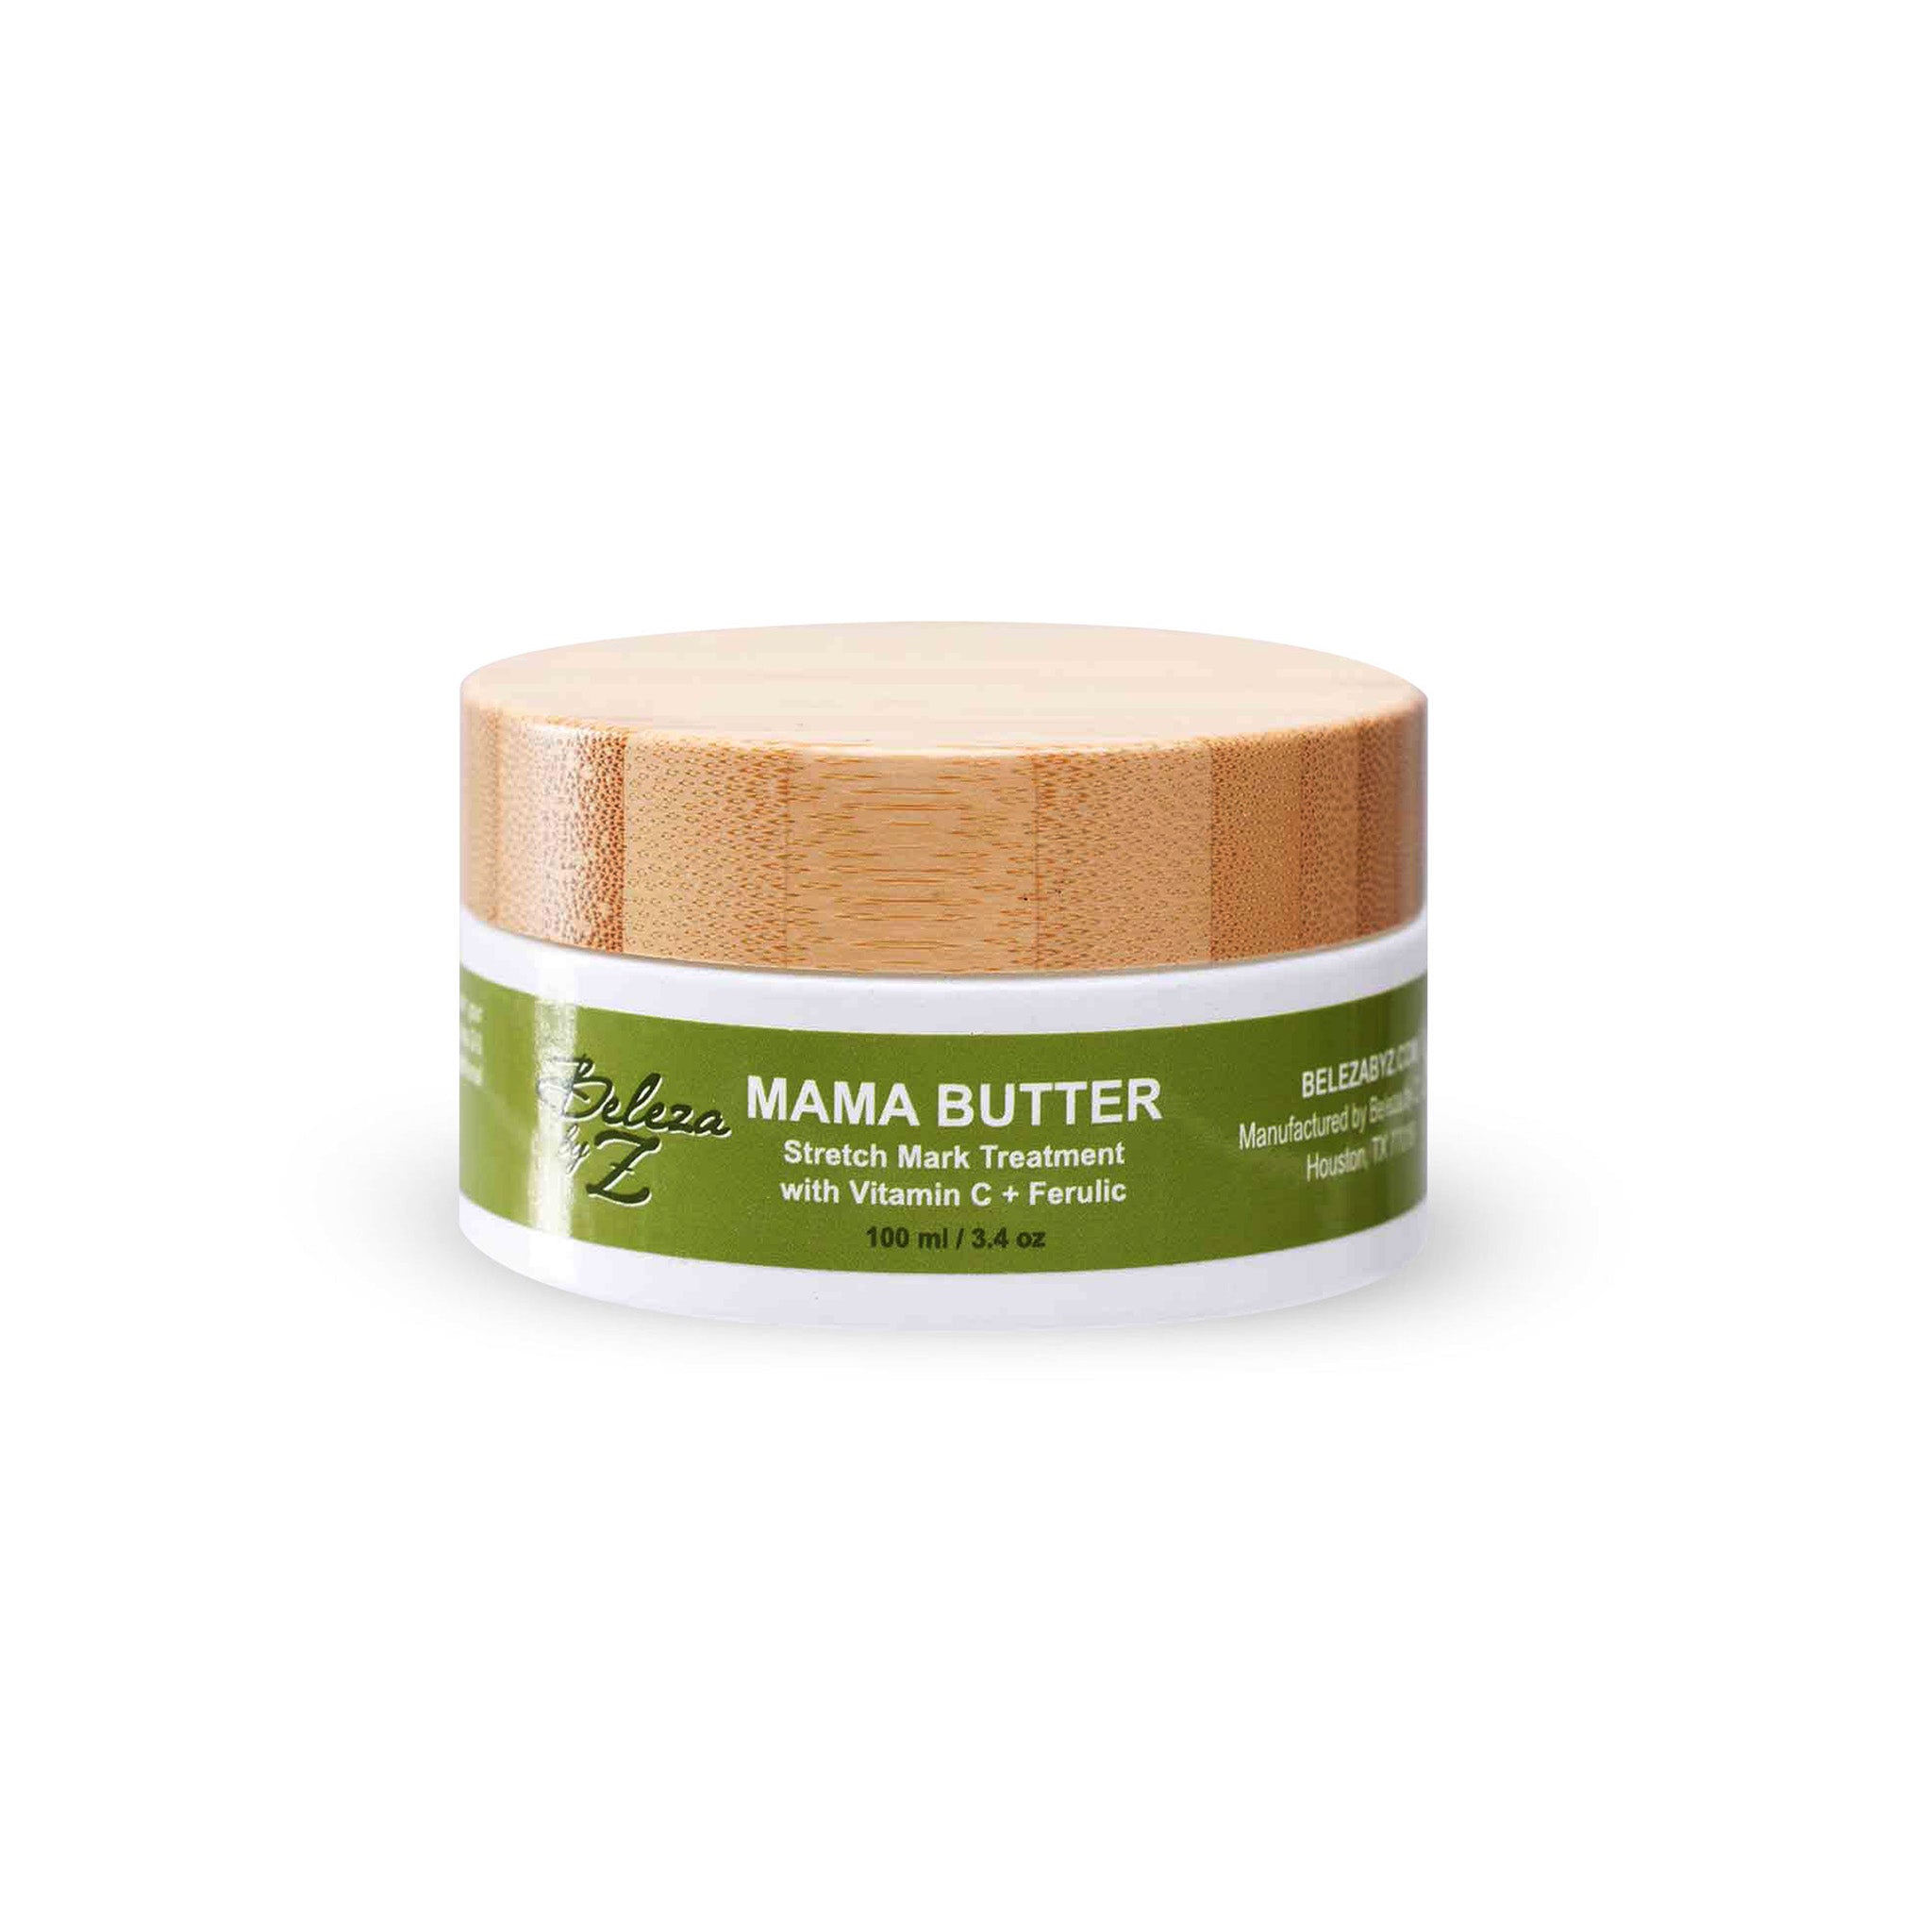 Mama Butter Stretch mark treatment formulated with organic butters, botanicals and antioxidants vitamin C and ferulic acid to help moisturize your growing belly, breasts, hips, and buttocks during pregnancy.